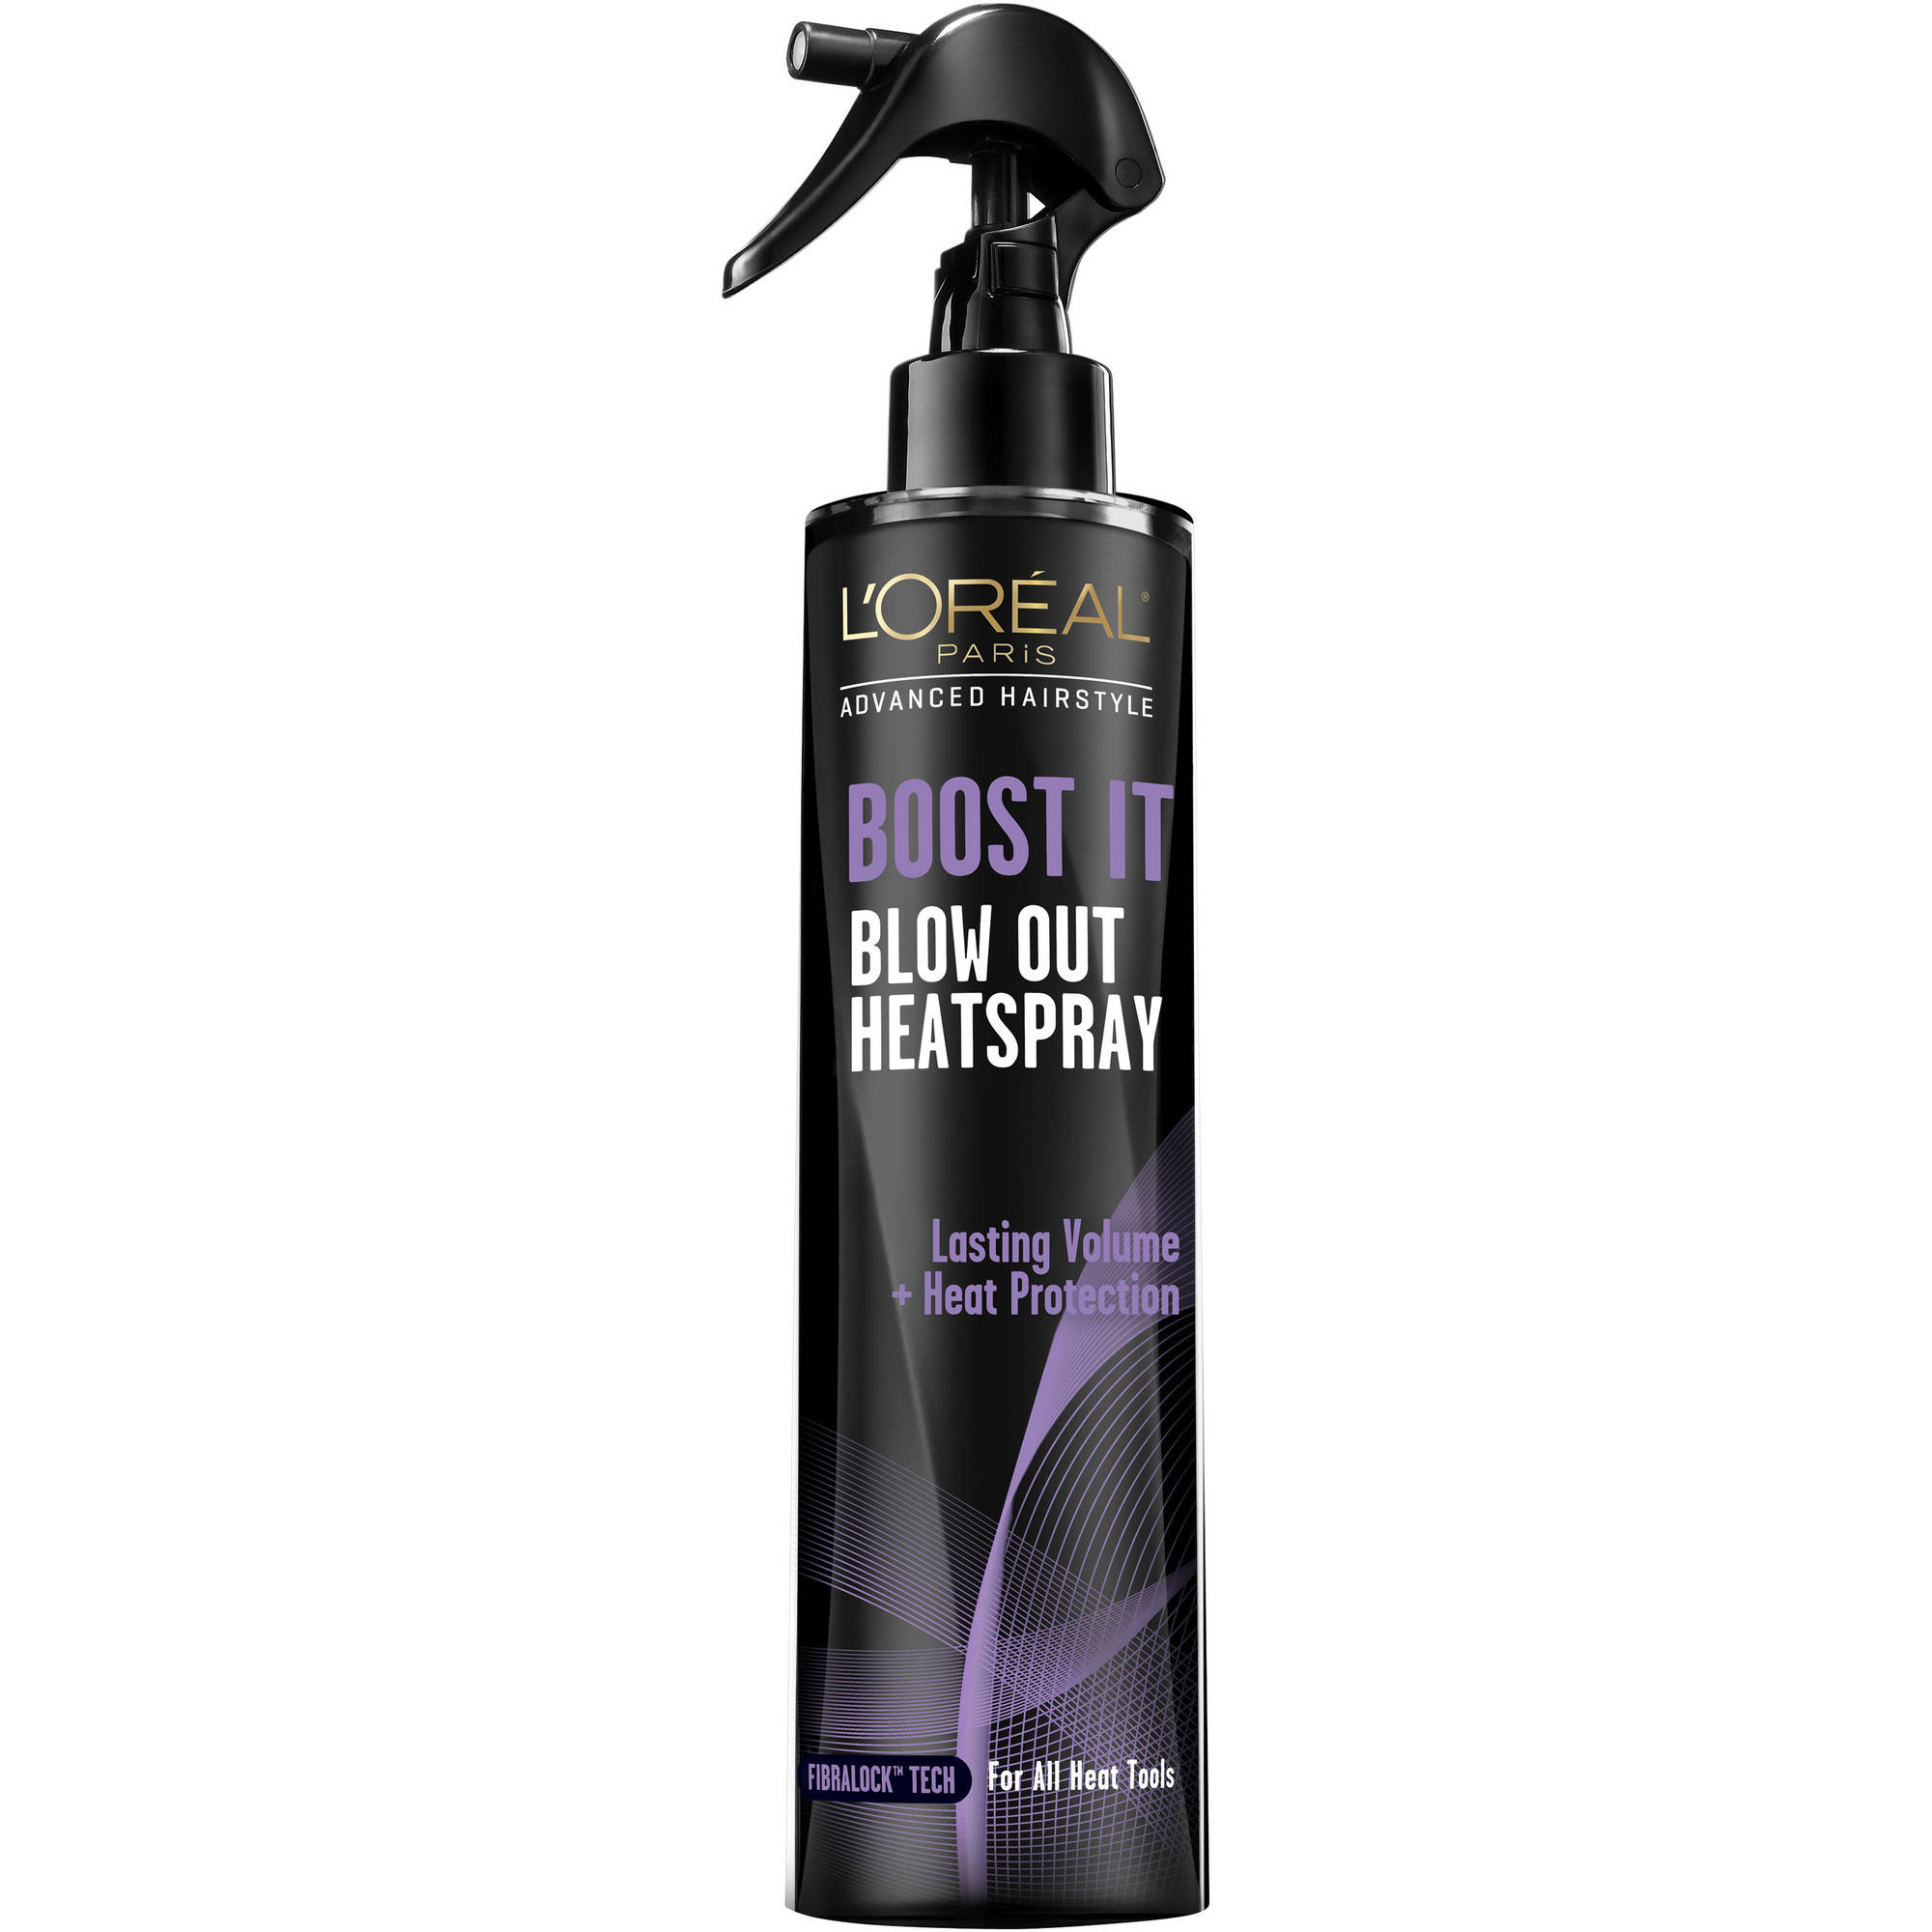 L'Oreal Paris Advanced Hairstyle BOOST IT Blow Out Heatspray 5.7 FL OZ - image 1 of 3